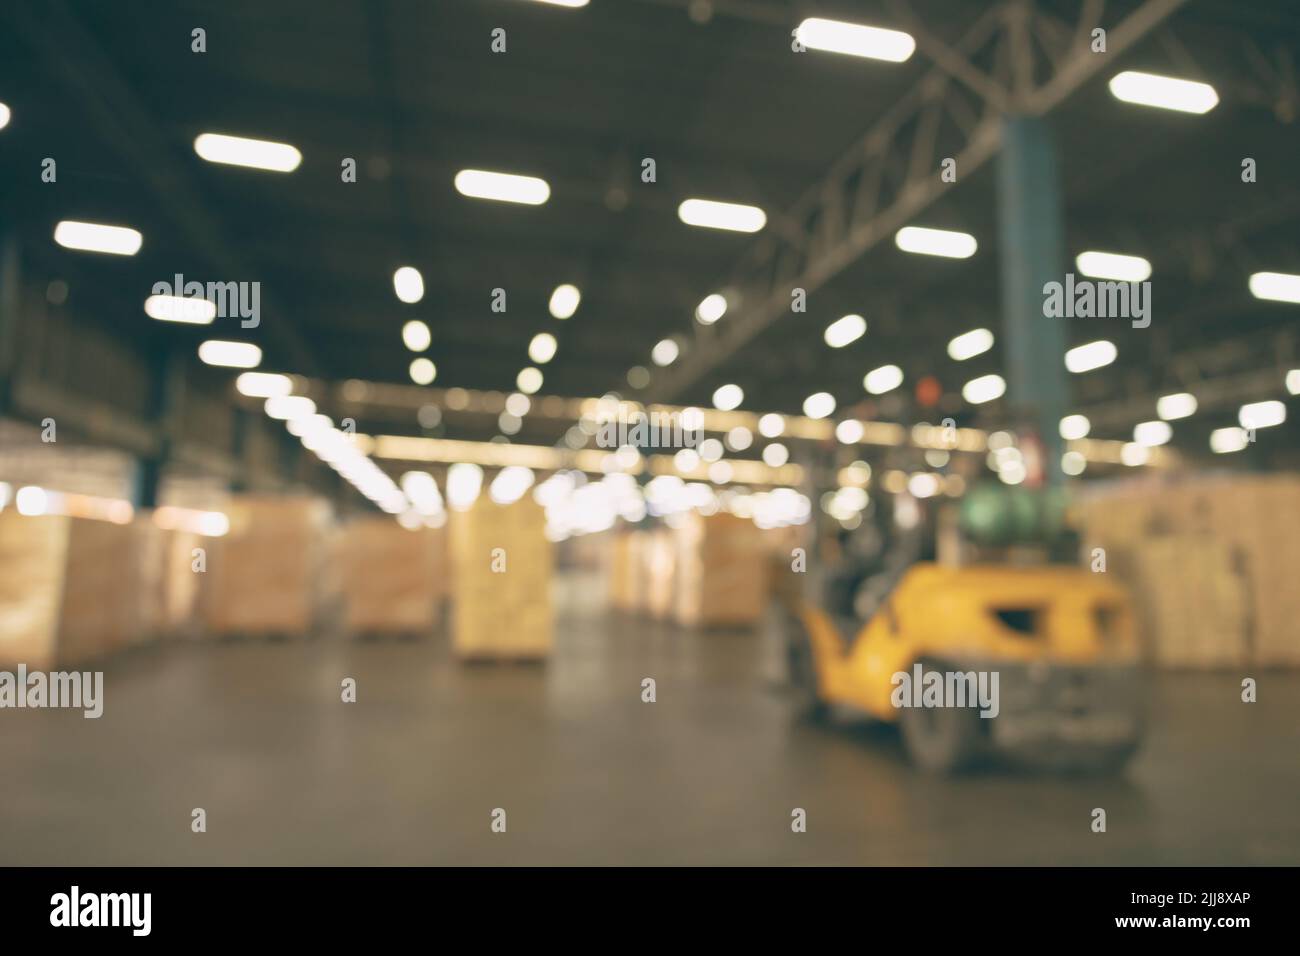 Blur Warehouse inventory product stock for logistics goods products distributor background Stock Photo